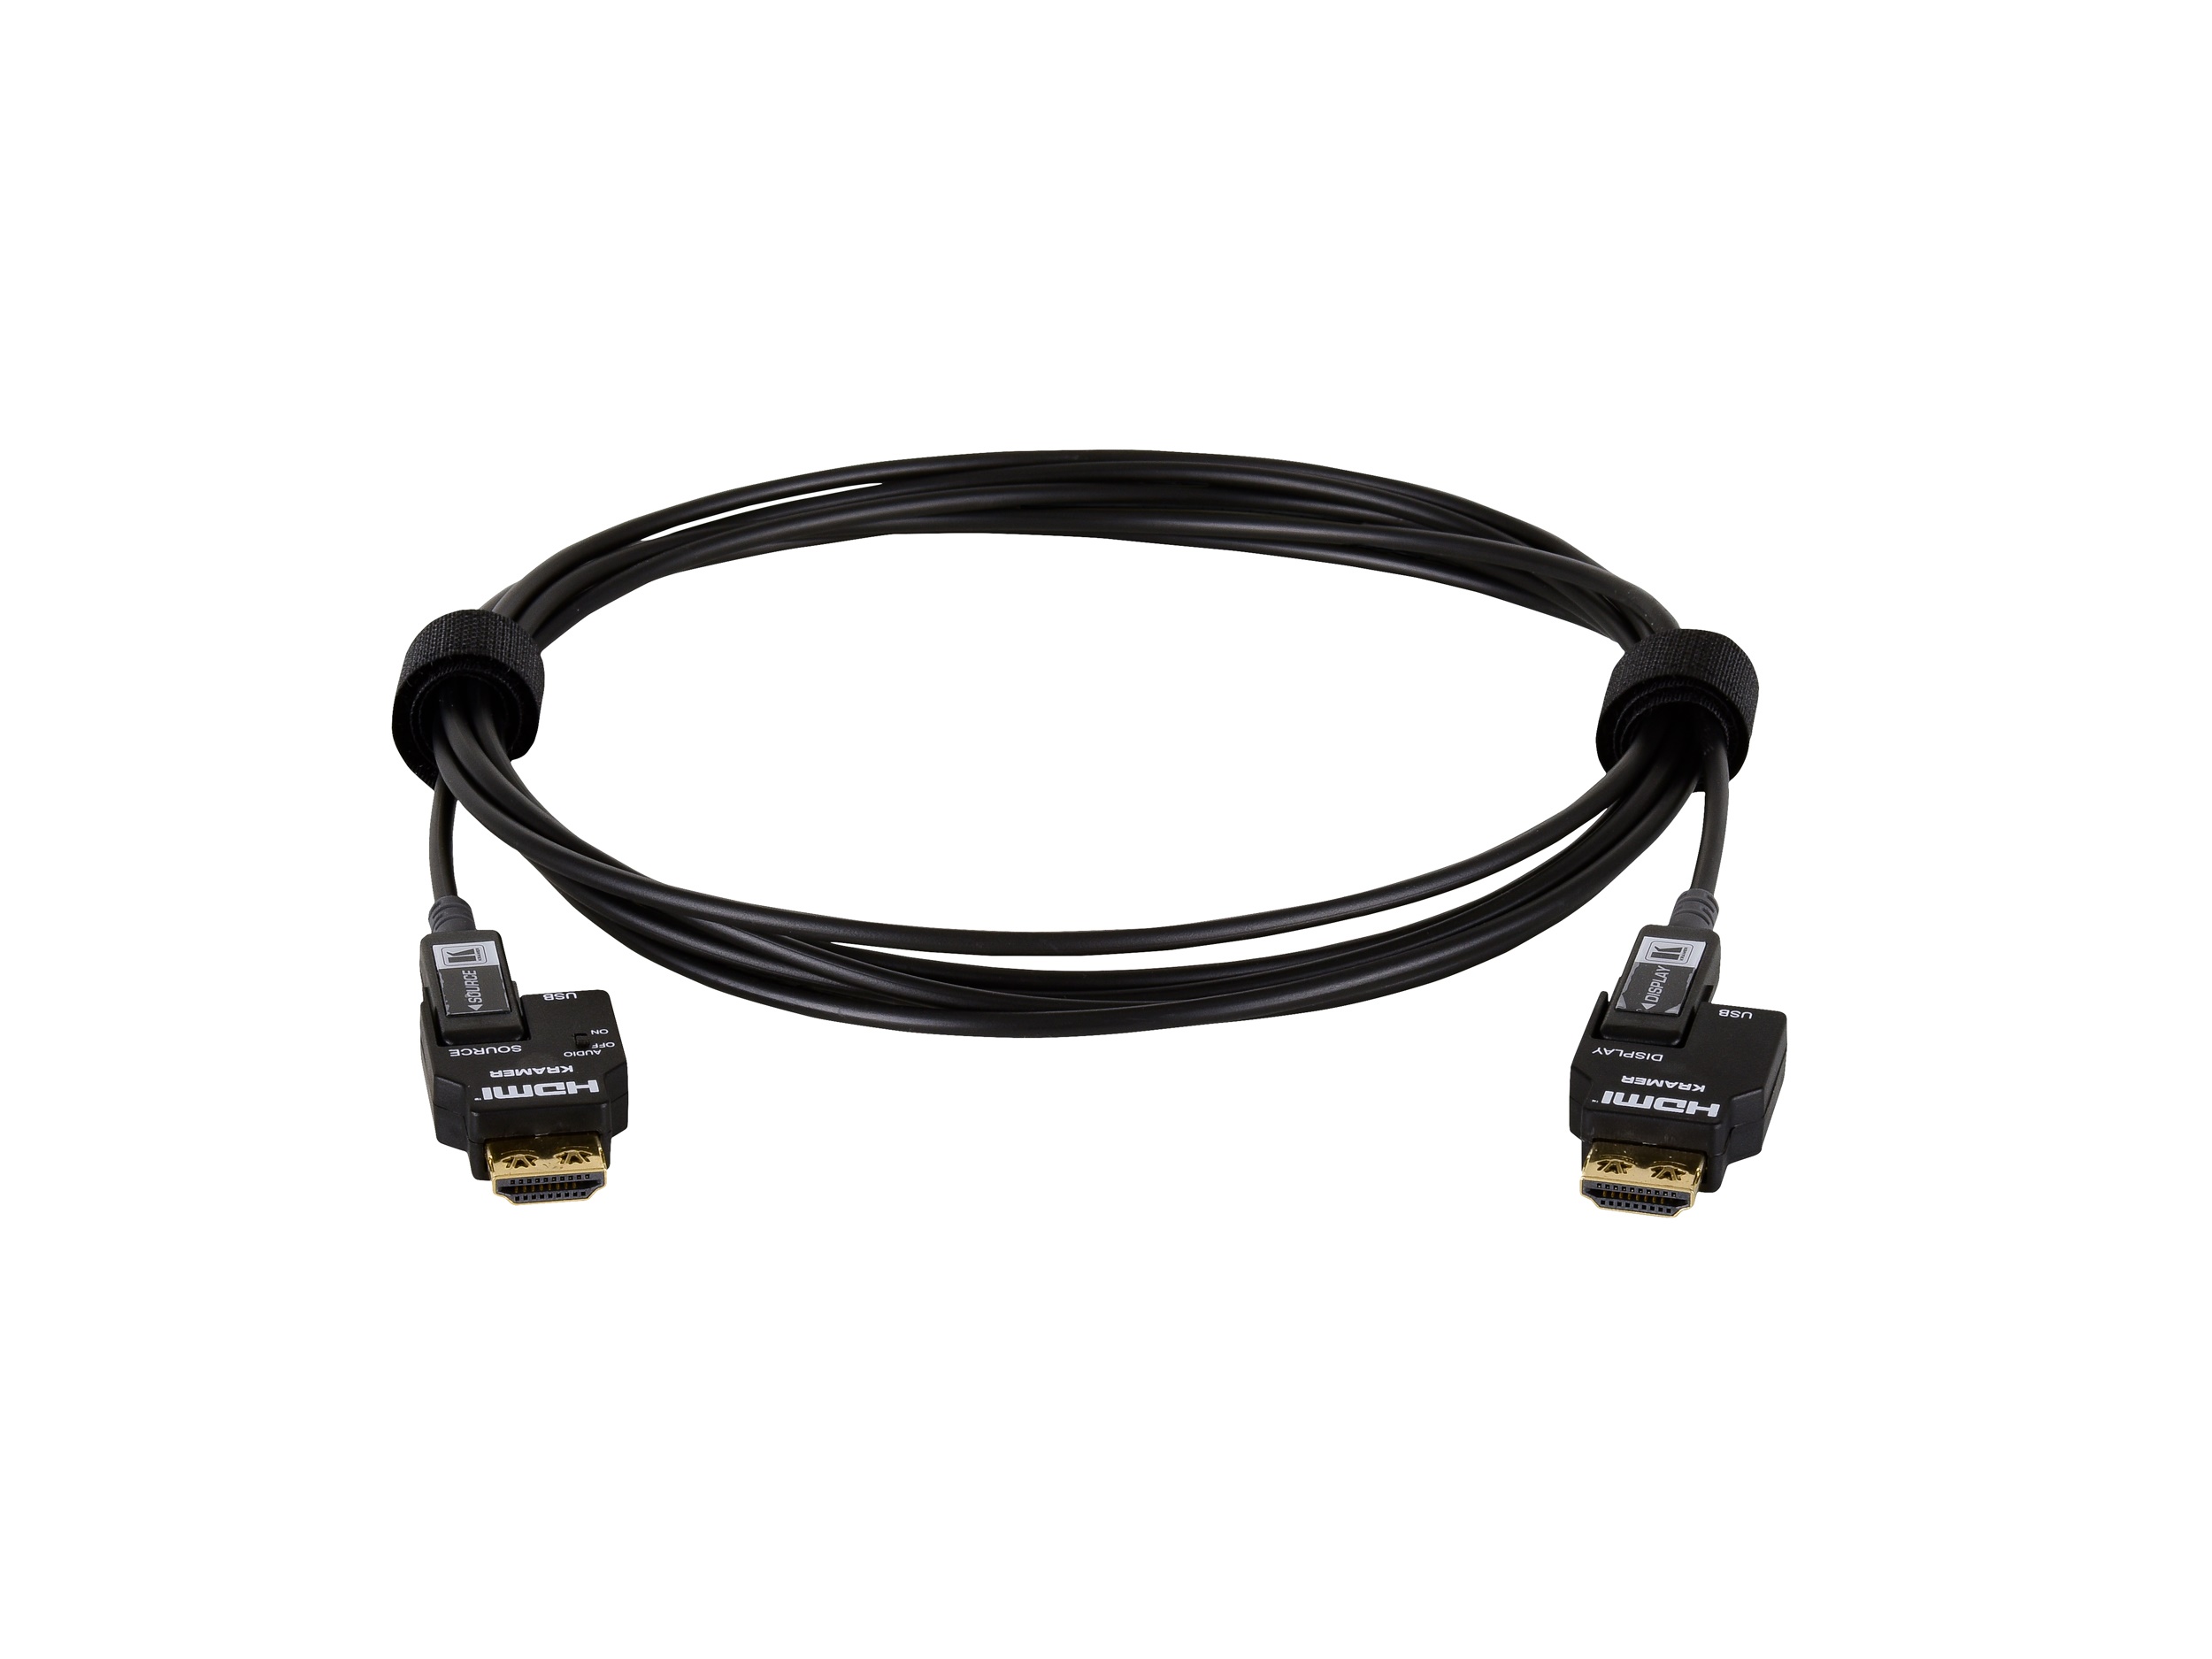 CRS-FIBERH-S1-66 20m/66ft 4K/60Hz (4x2x0) Secured Unidirectional 4K Pluggable HDMI Cable over Pure Fiber Cable by Kramer